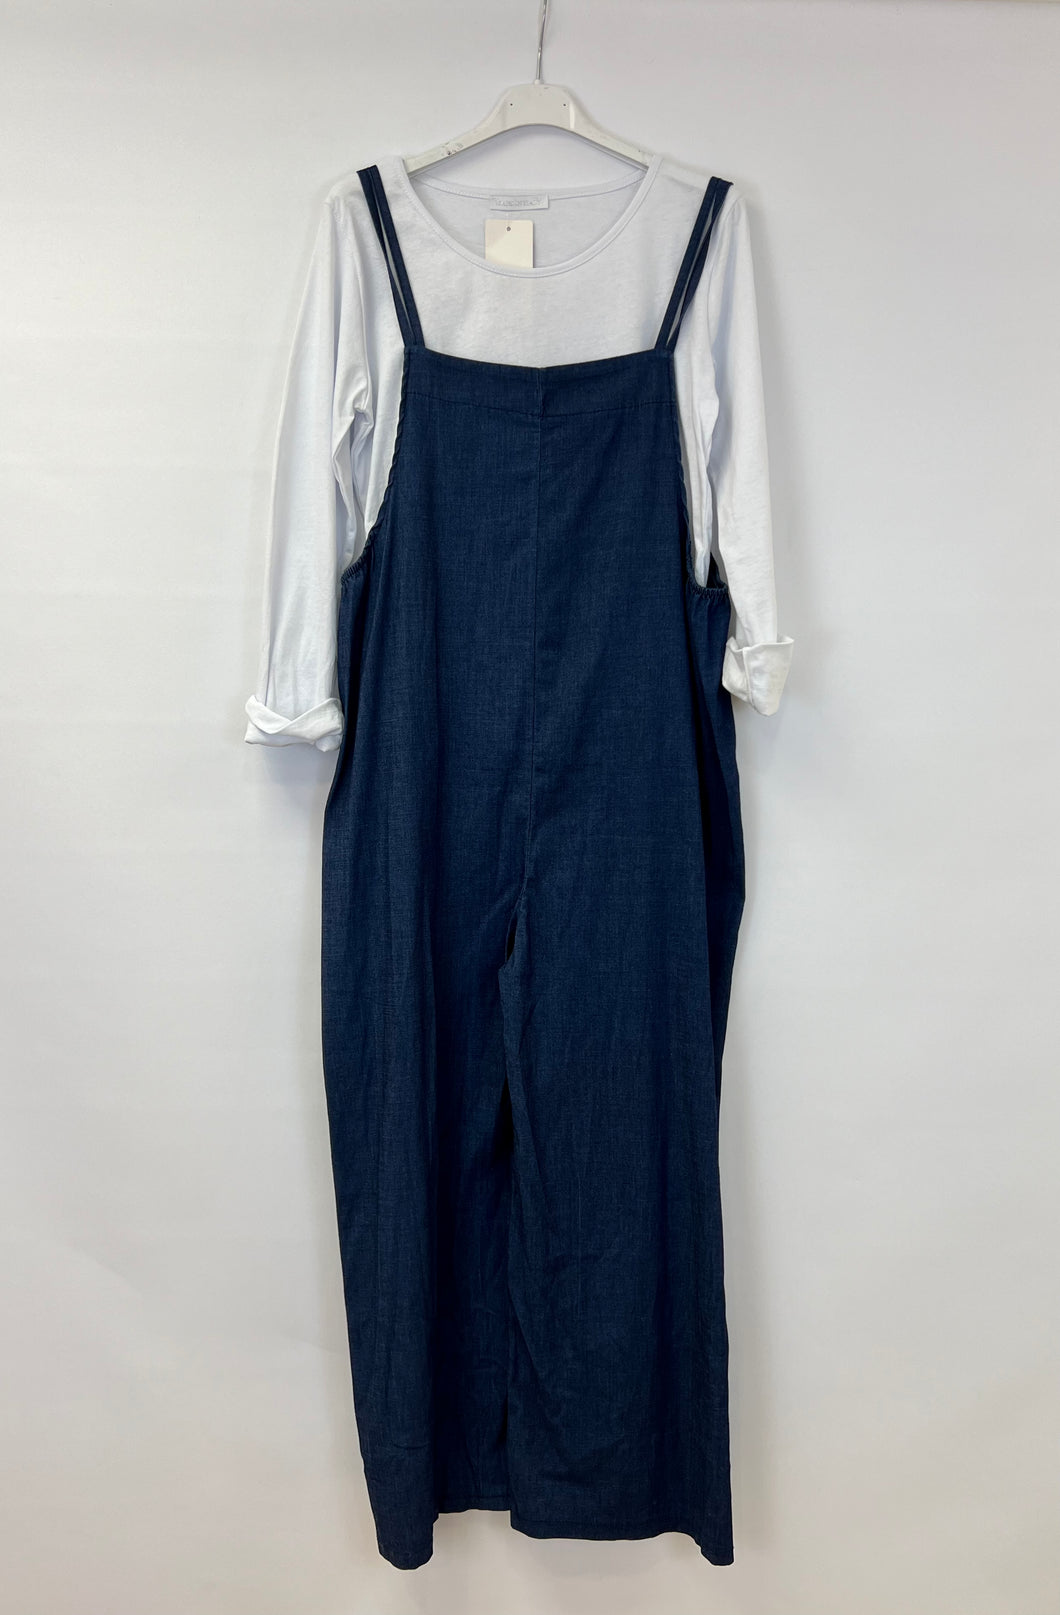 Denim two piece dungarees